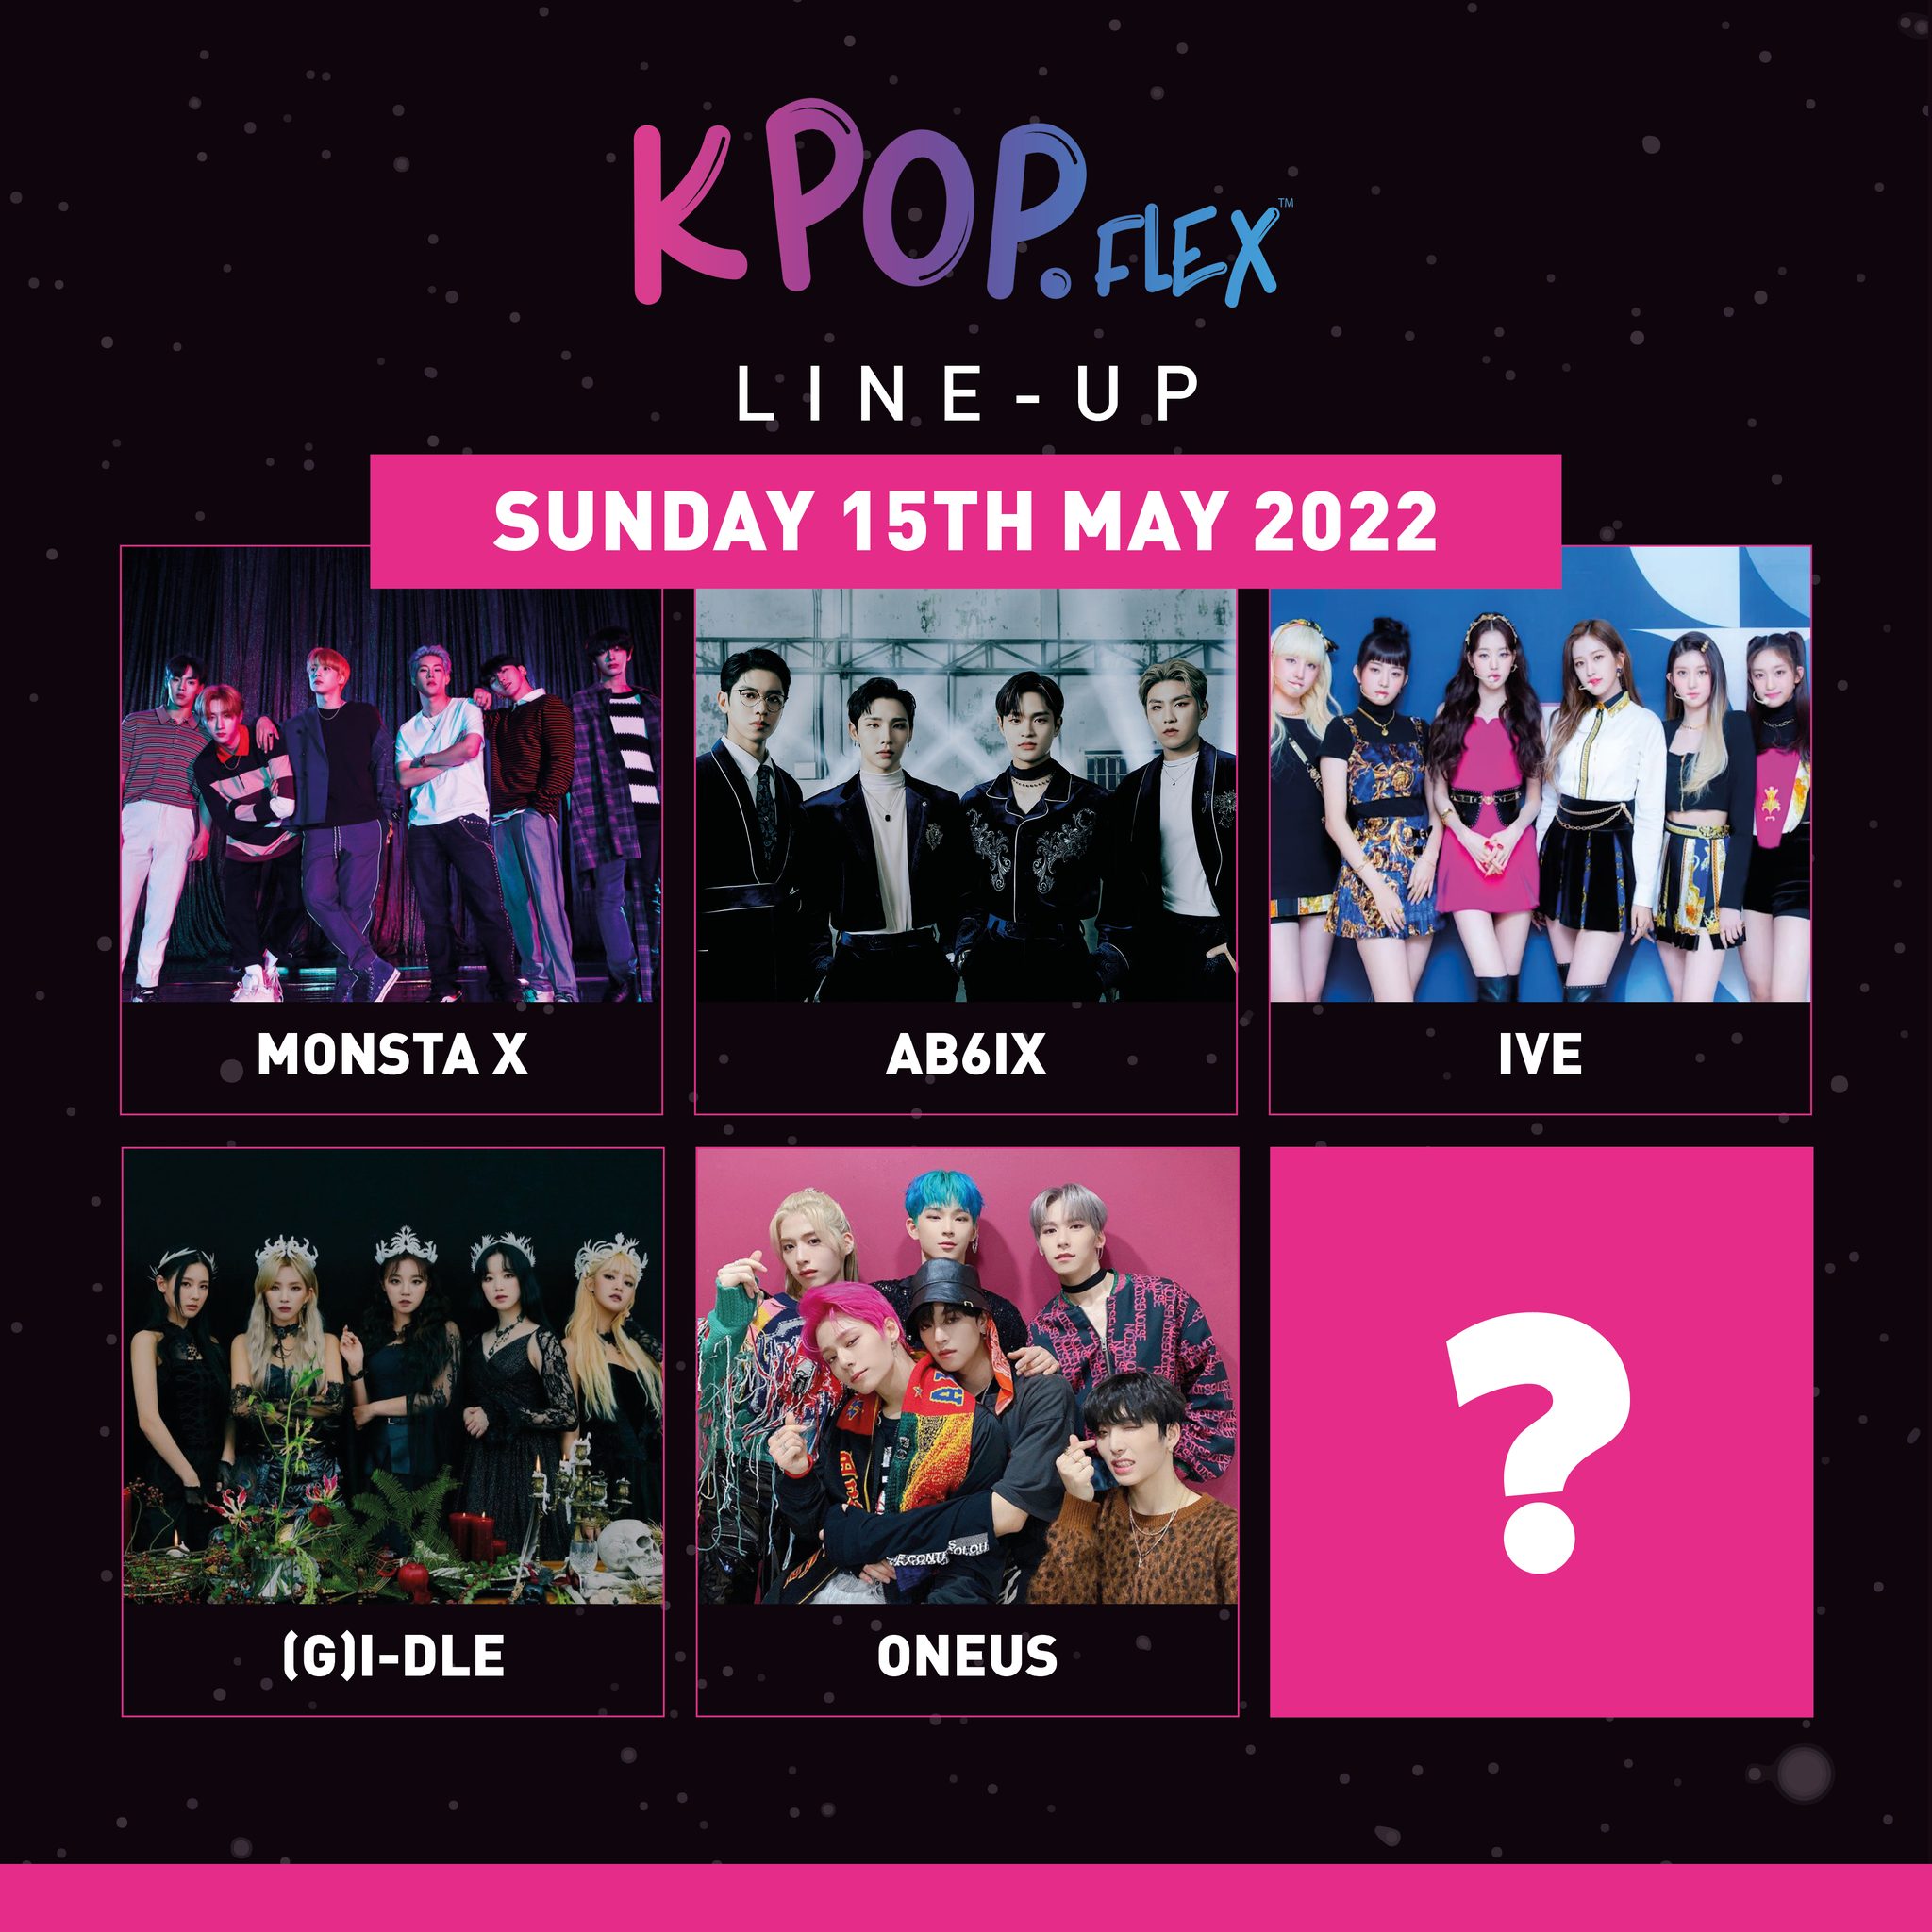 KPOP.FLEX Additional date and updated lineup ⋆ The latest kpop news